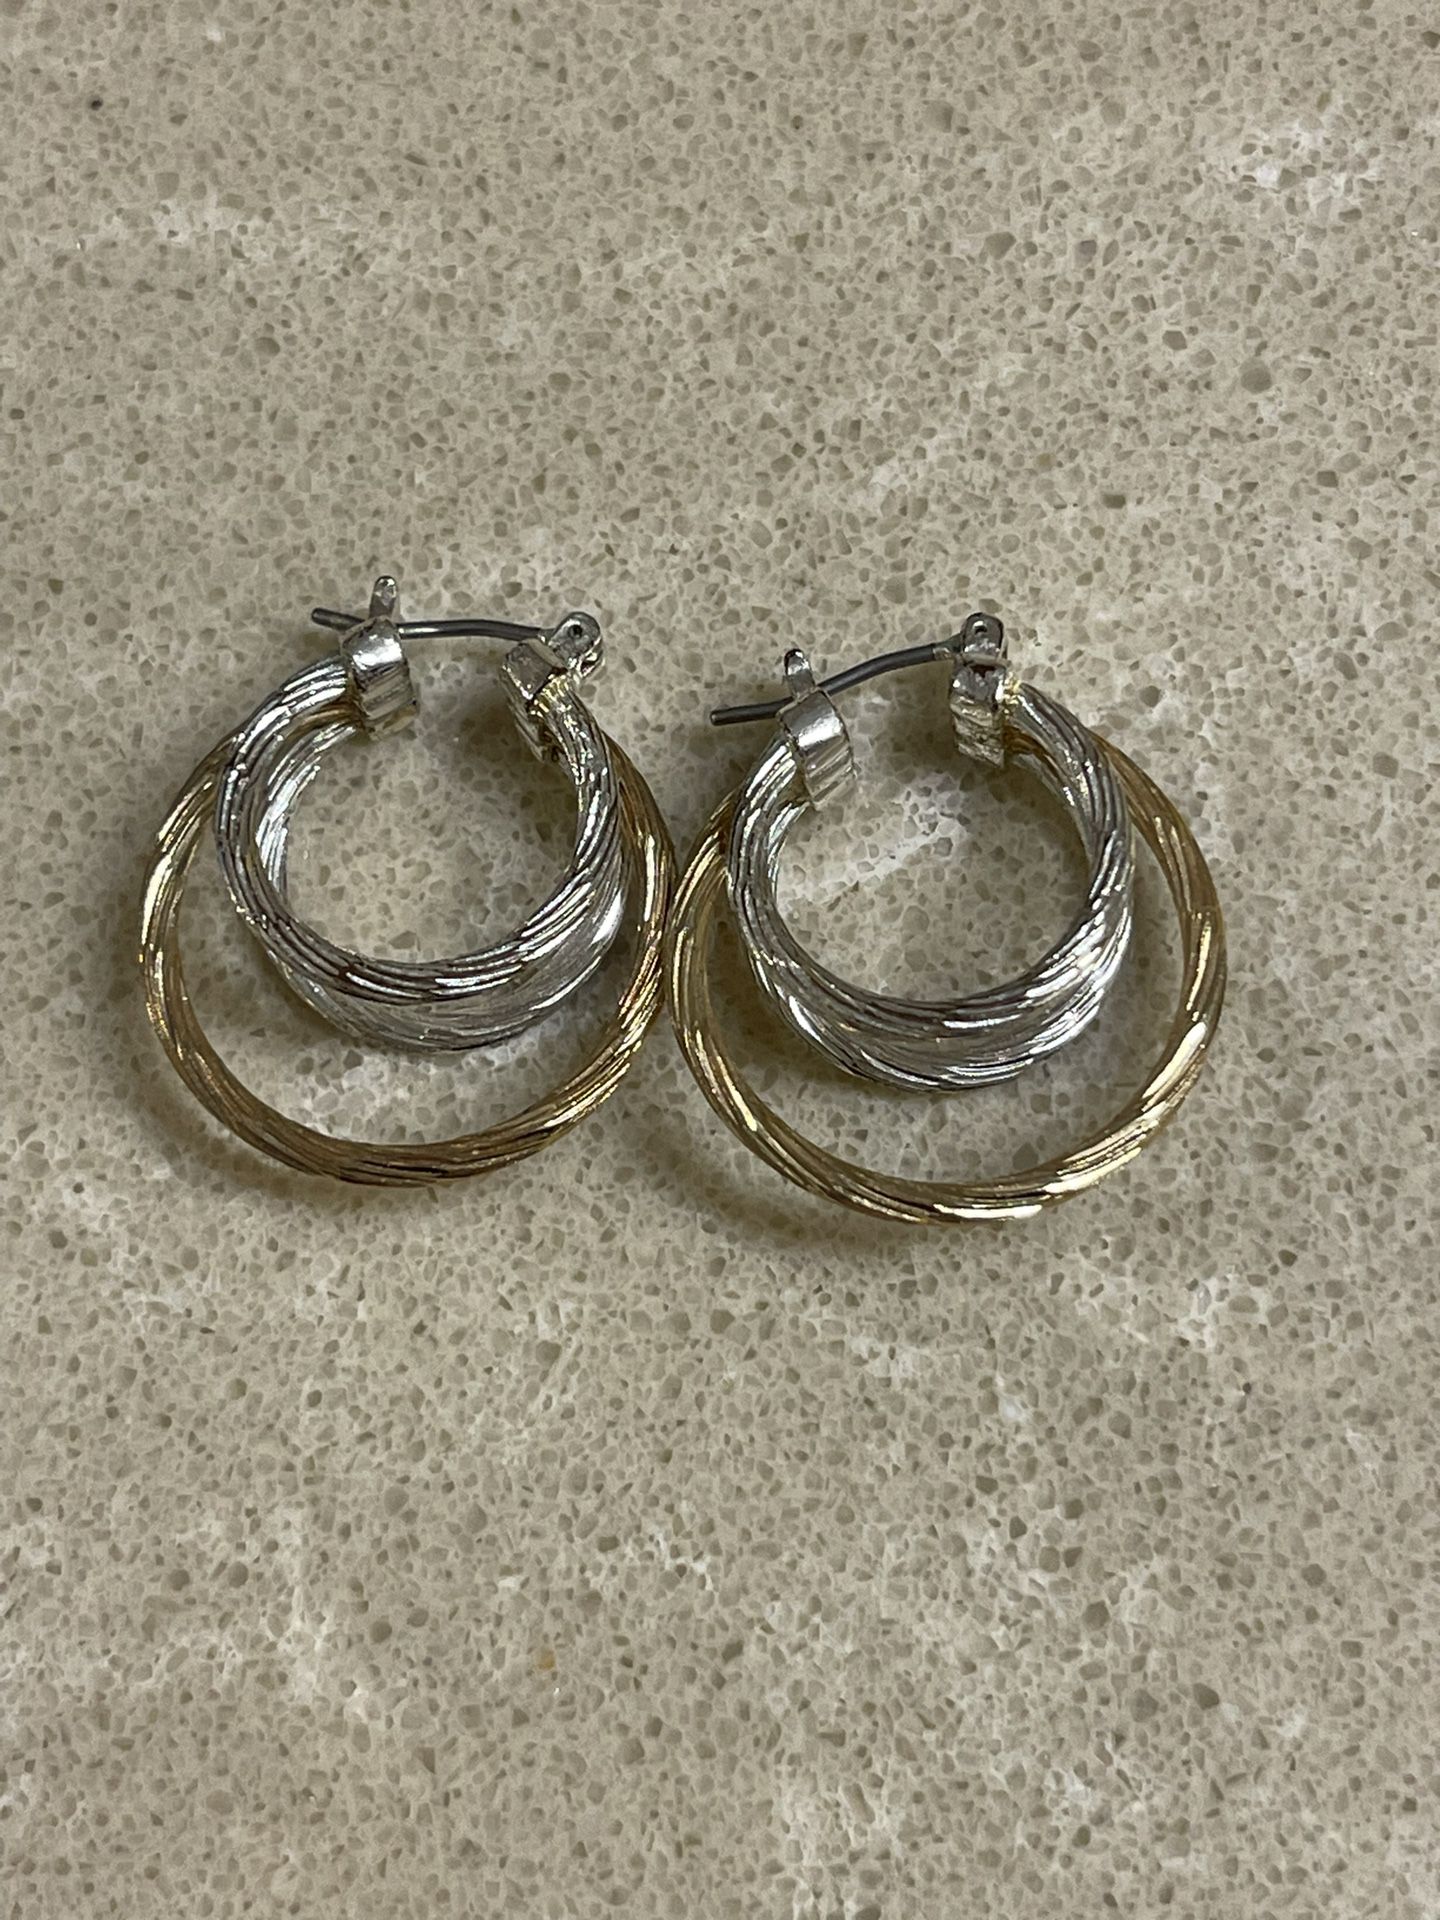 Vintage two tone hoop earrings, good condition. Pet and smoke free home. 